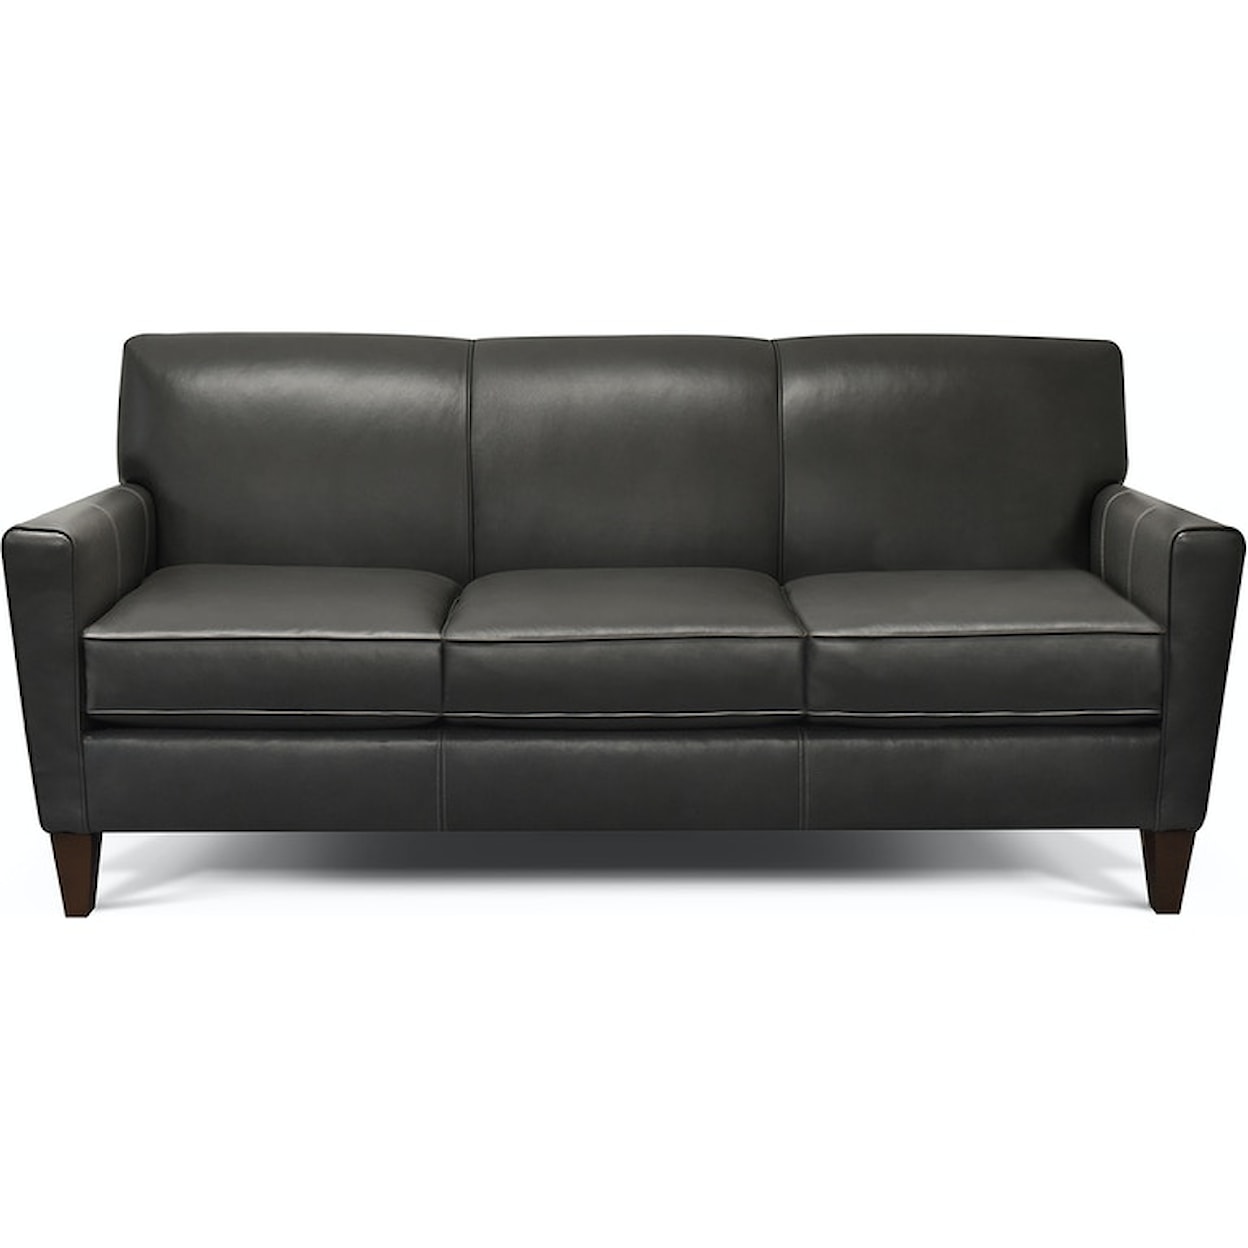 Dimensions 6200/LS Series Leather Sofa